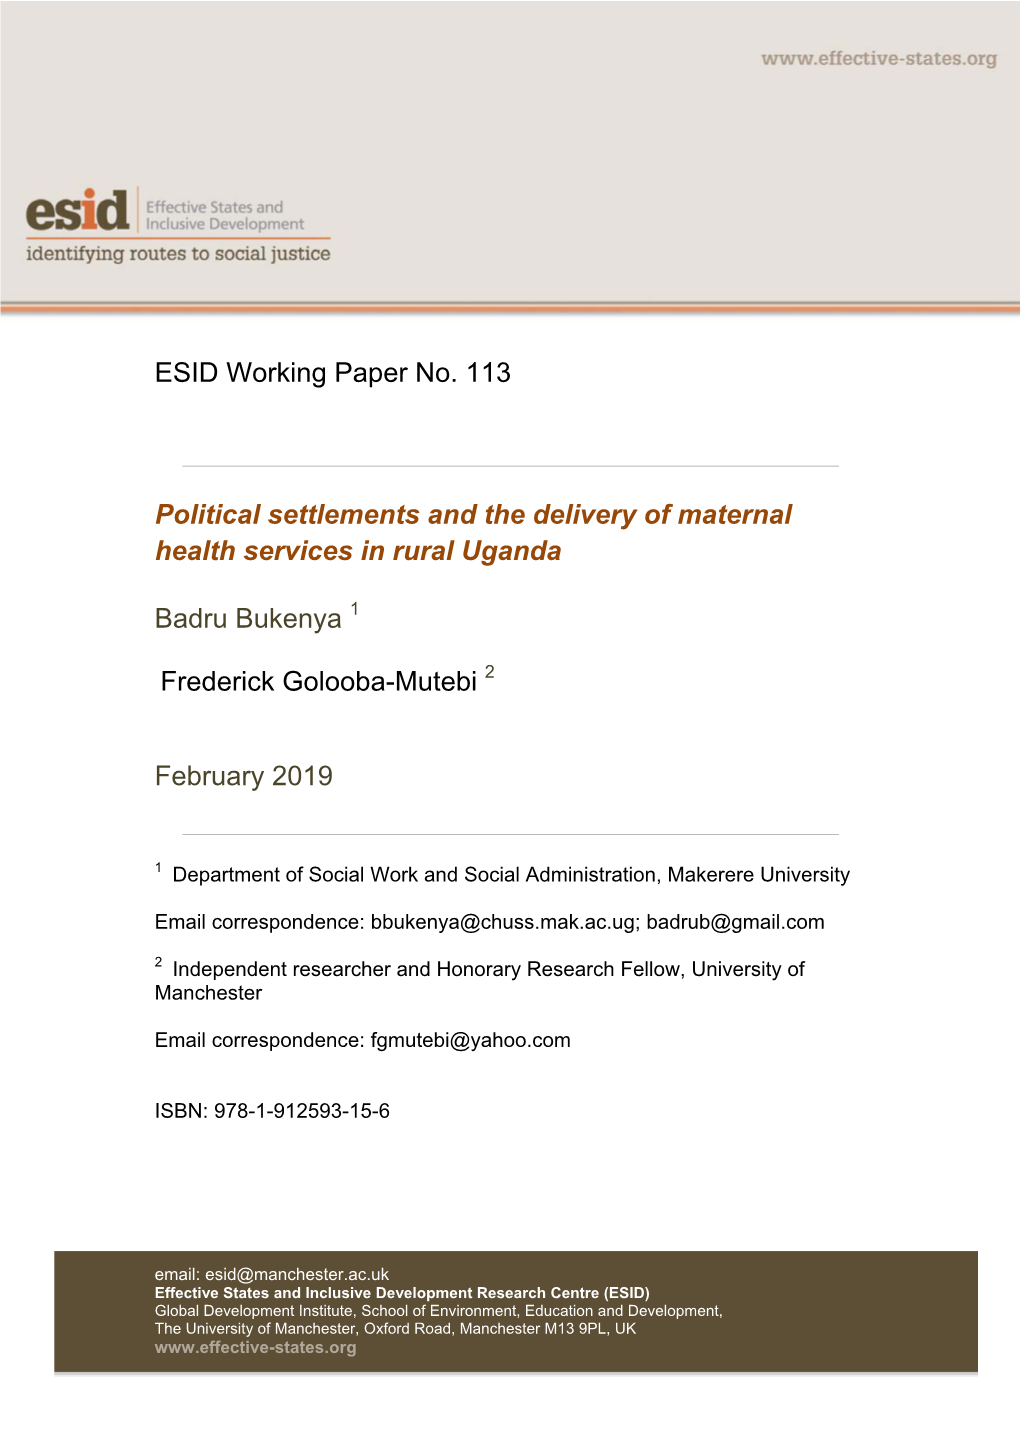 ESID Working Paper No. 113 Political Settlements and the Delivery Of